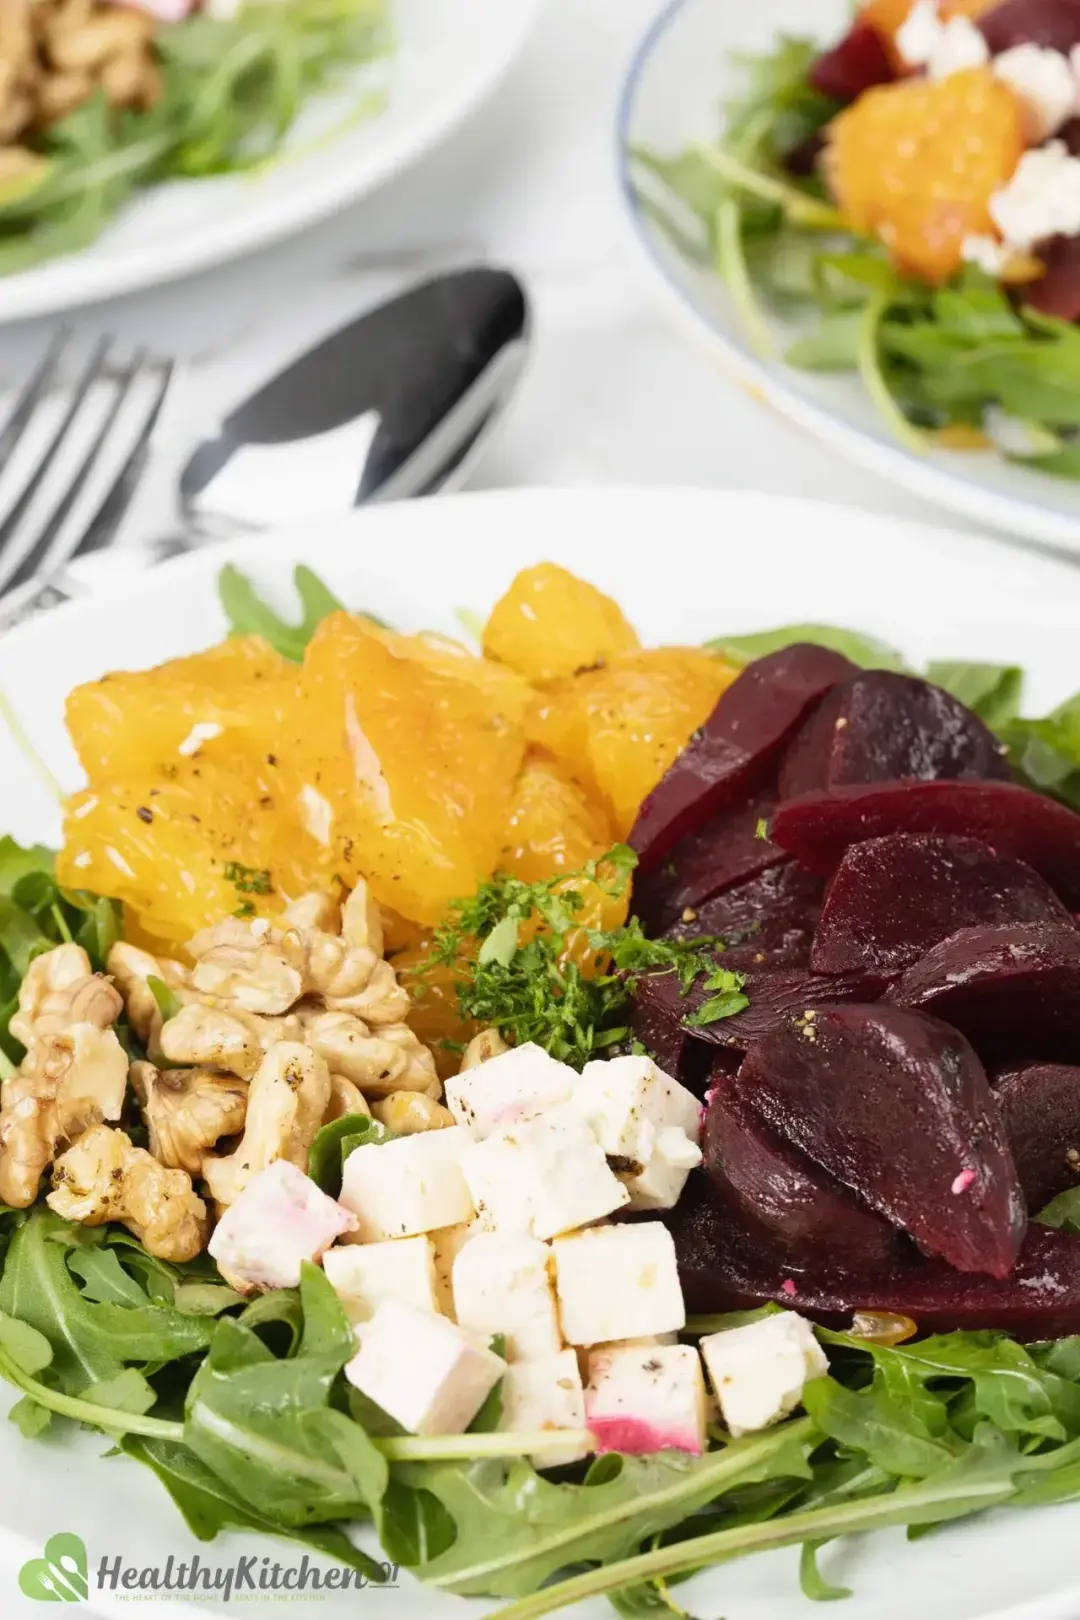 A bowl of beet and feta cheese salad with arugula, oranges, and walnuts.